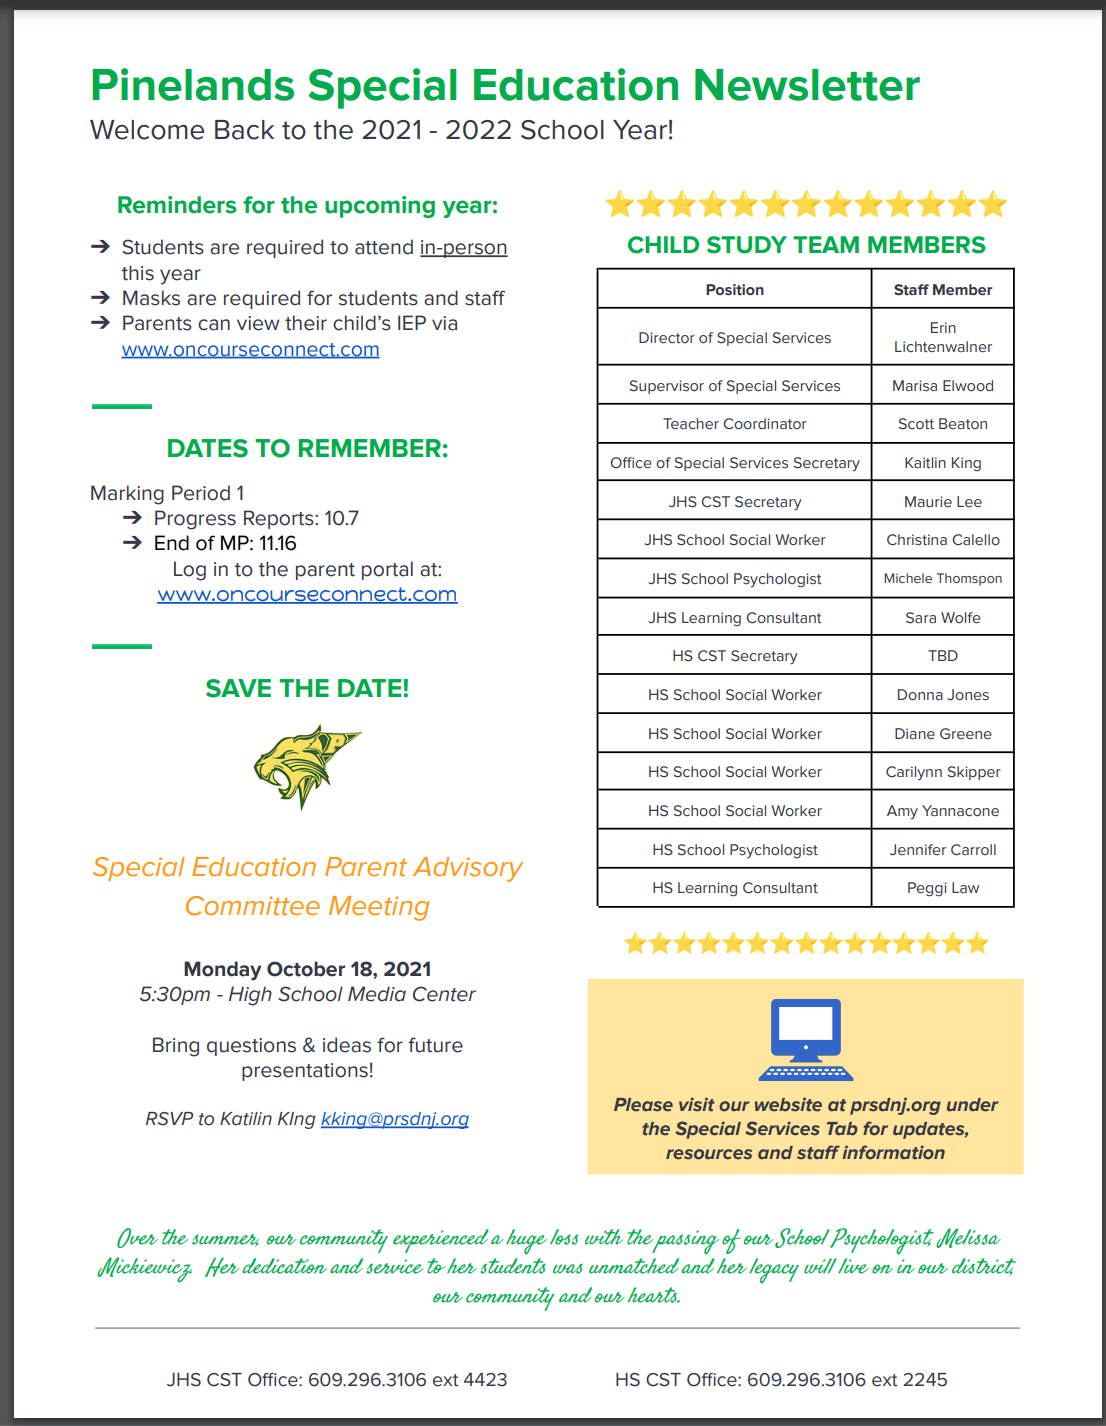 Pinelands Special Education Newsletter